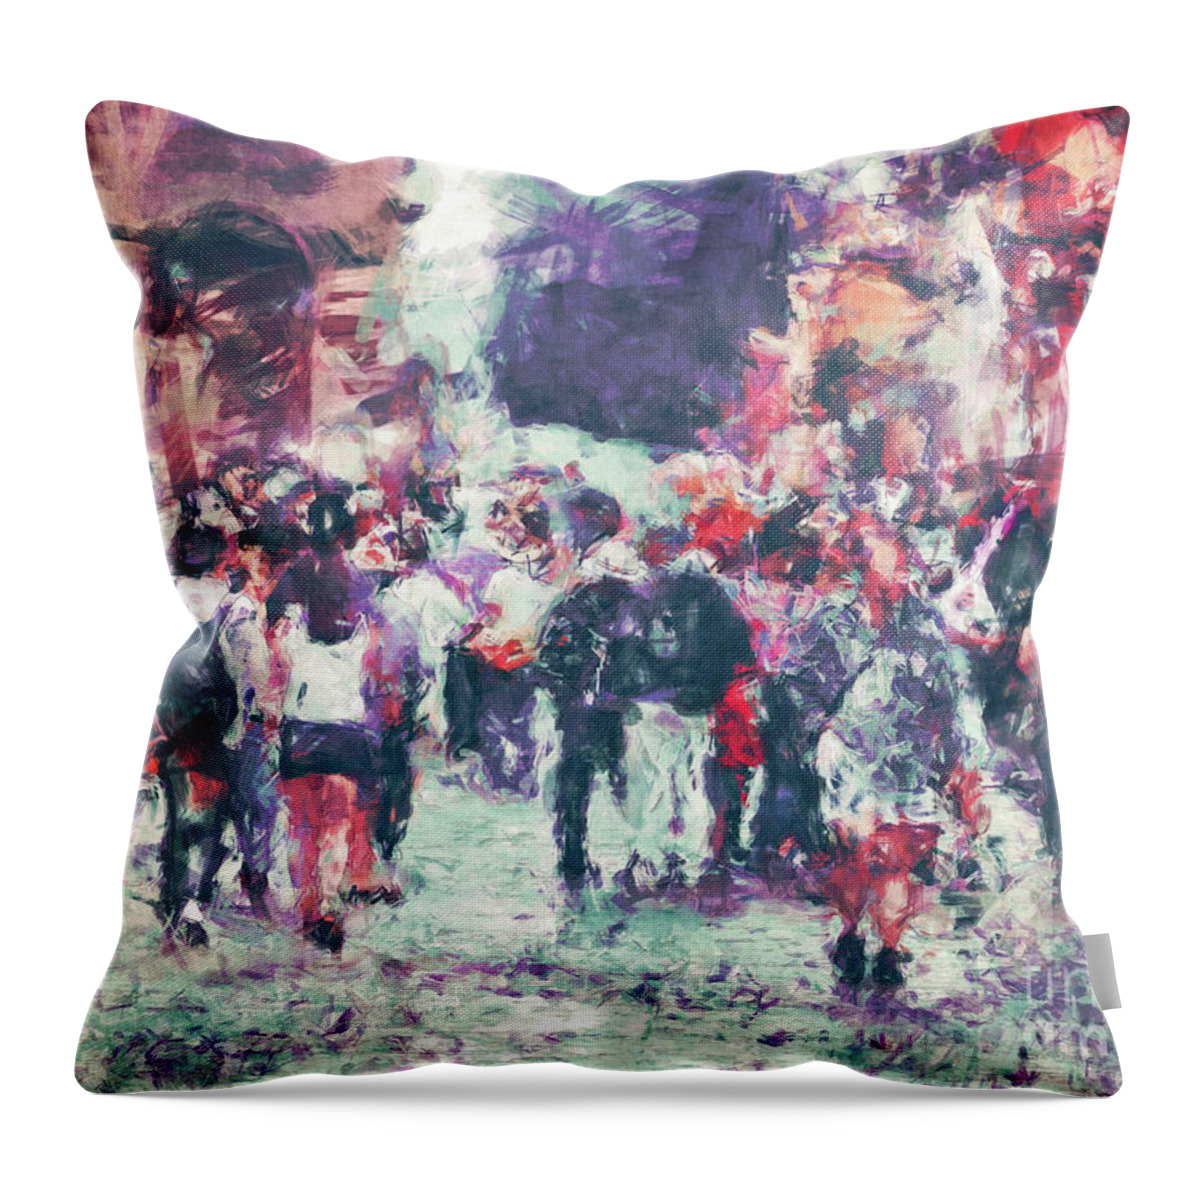 Street Throw Pillow featuring the digital art Crowded Street #1 by Phil Perkins